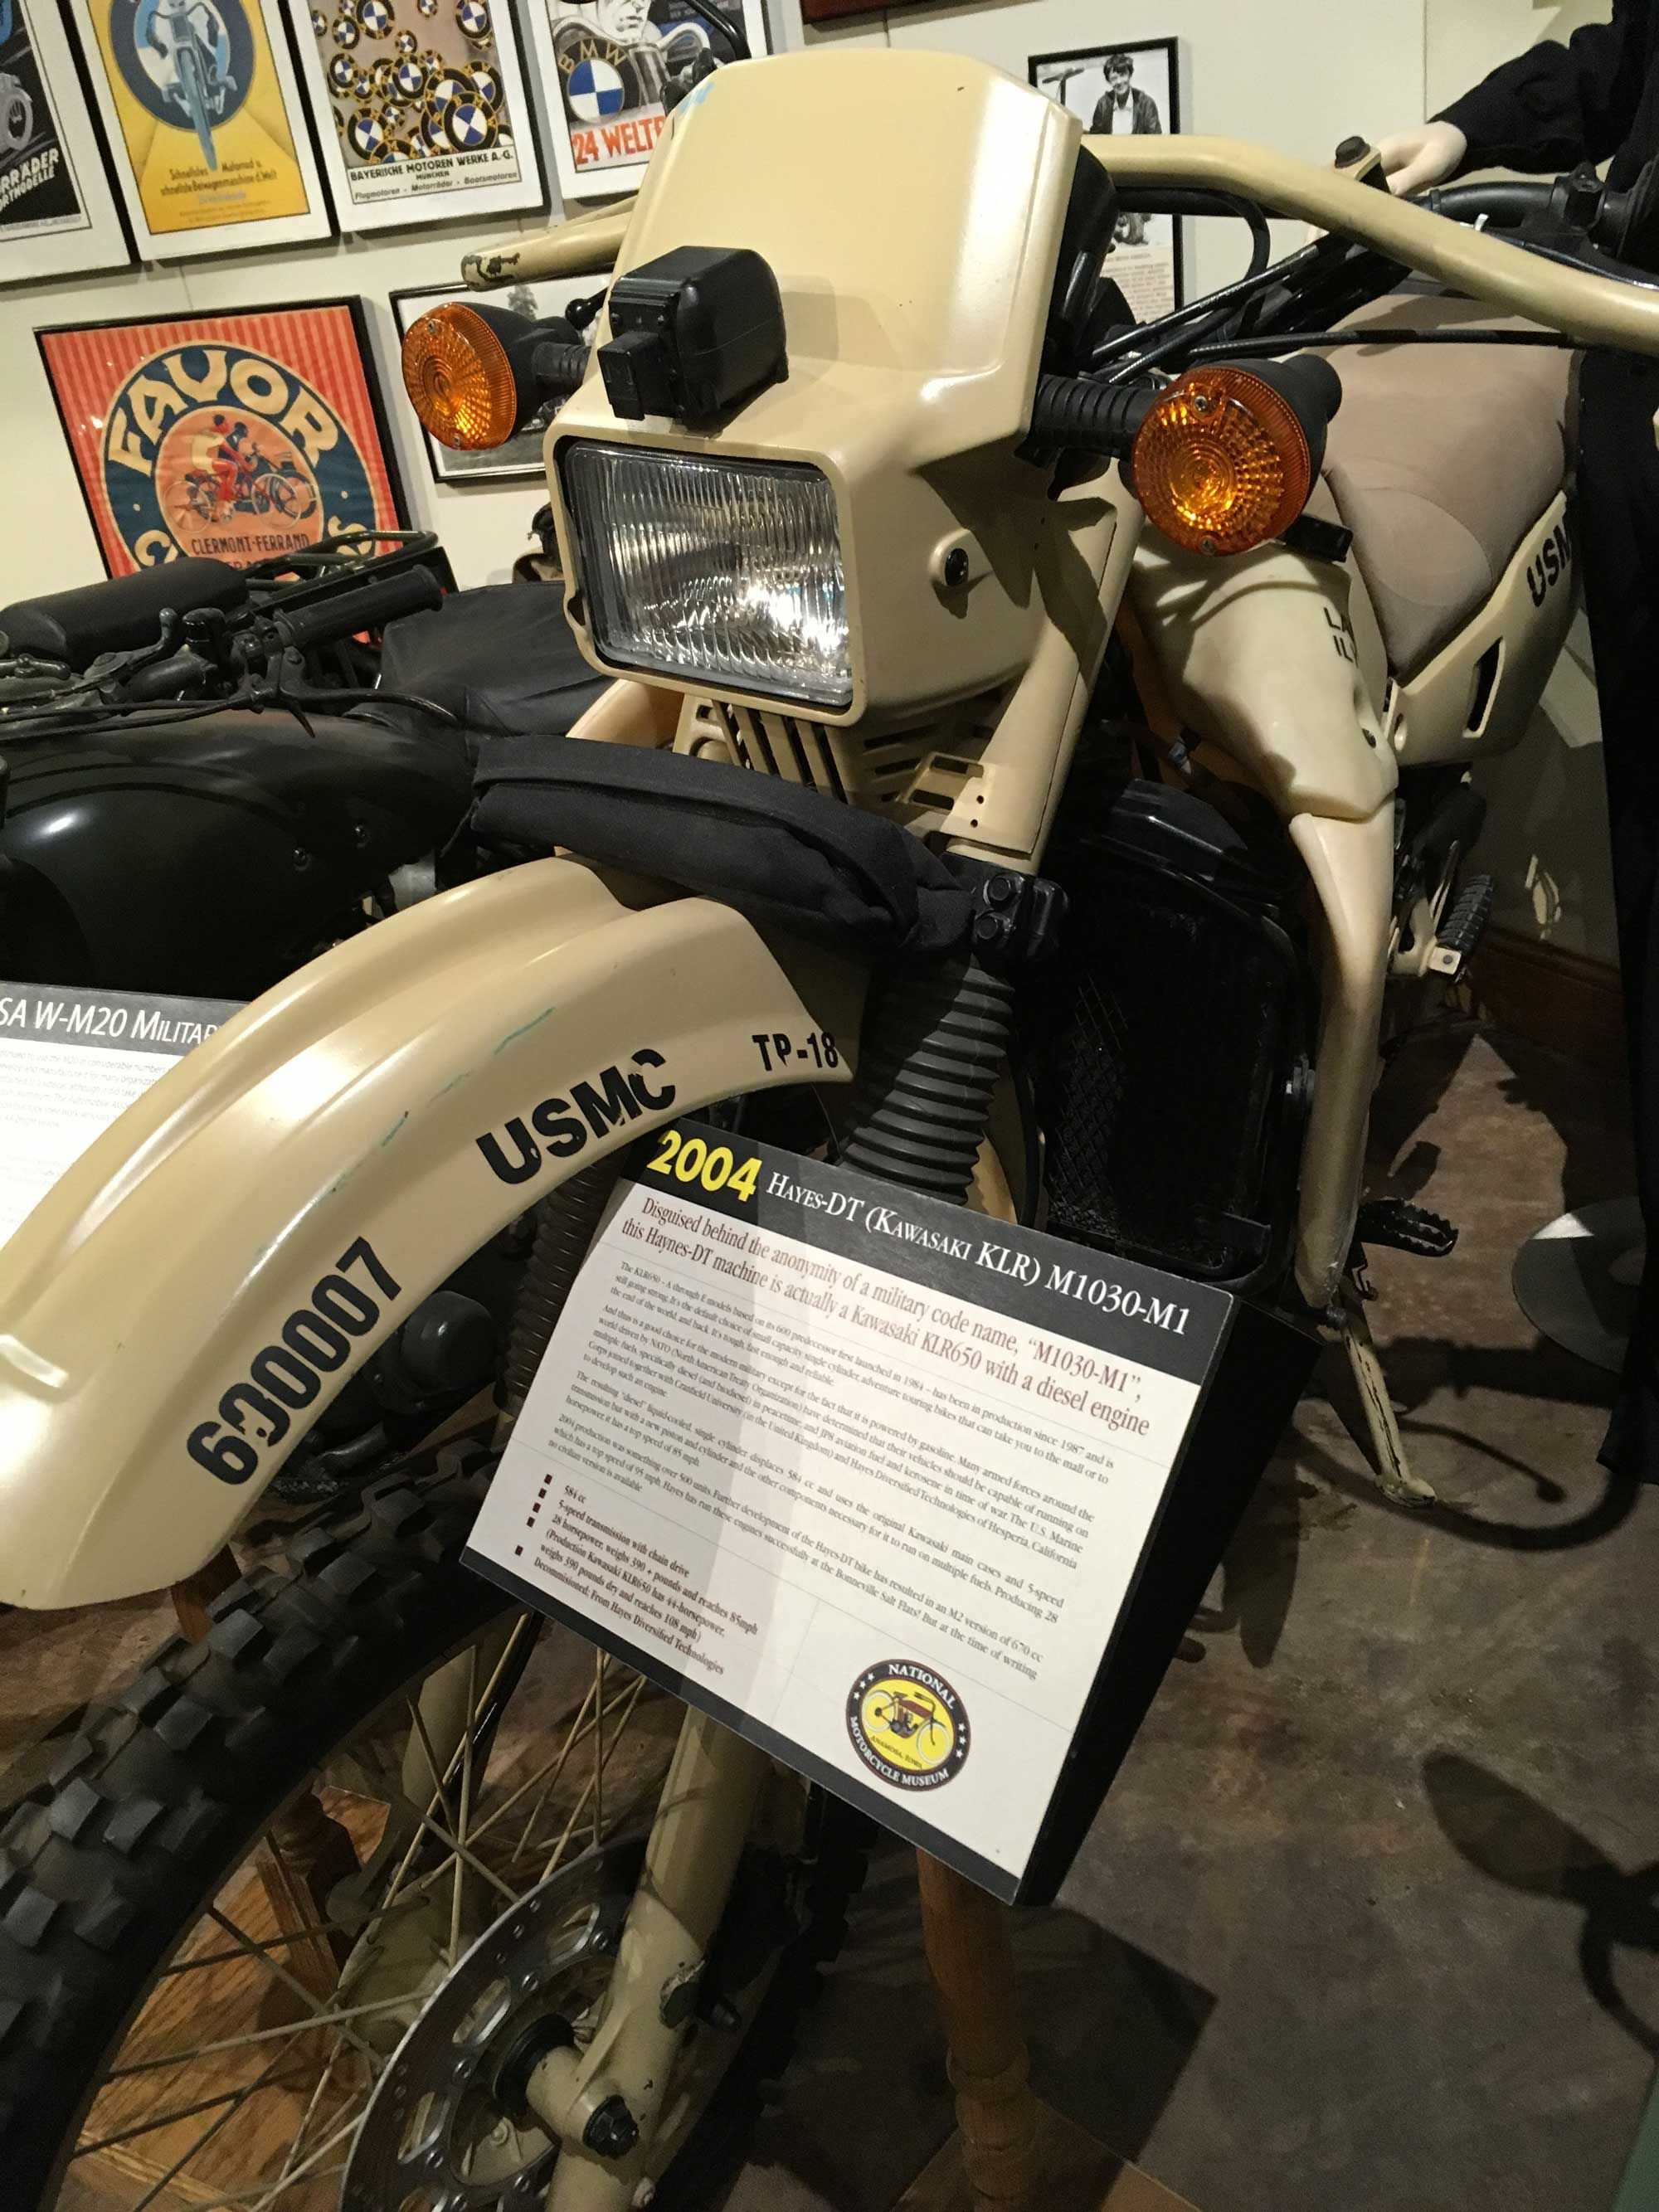 Want to see the diesel-powered HDT M103M1 up close? Visit a museum, like the National Motorcycle Museum, in Anamosa, Iowa.